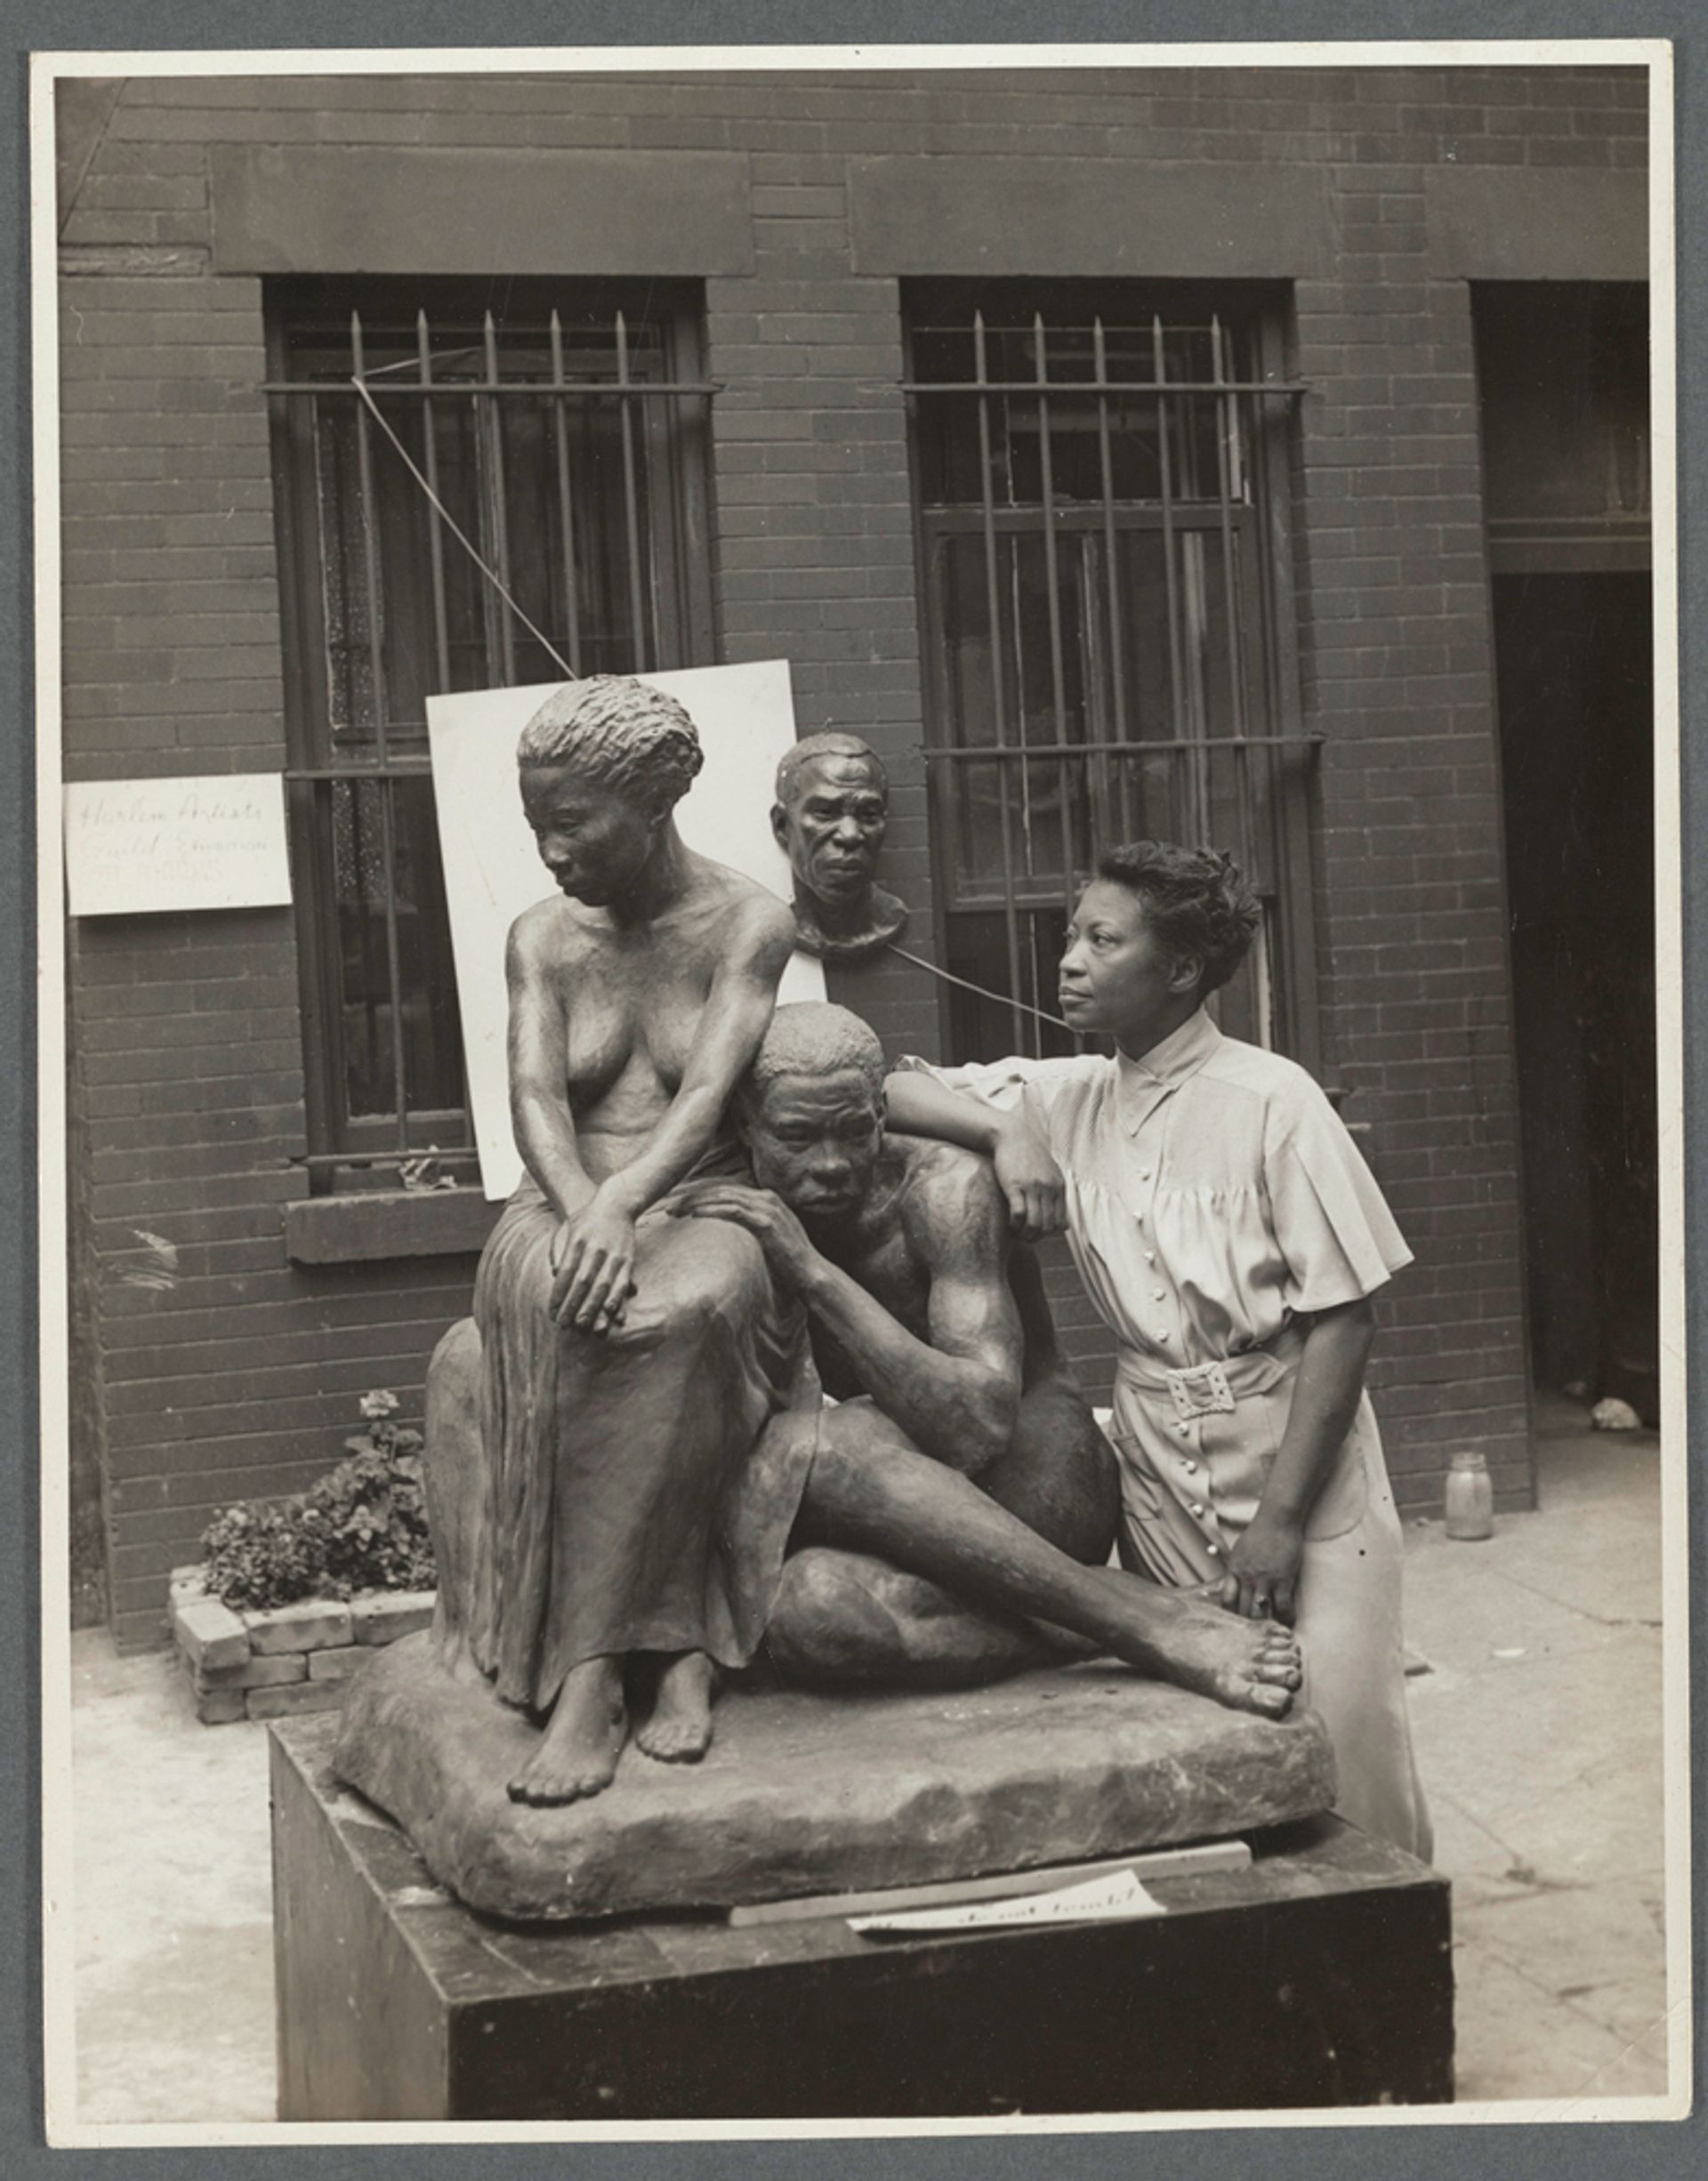 Andrew Herman,  Augusta Savage with her sculpture Realization (1938) Schomburg Center for Research in Black Culture, NYPL